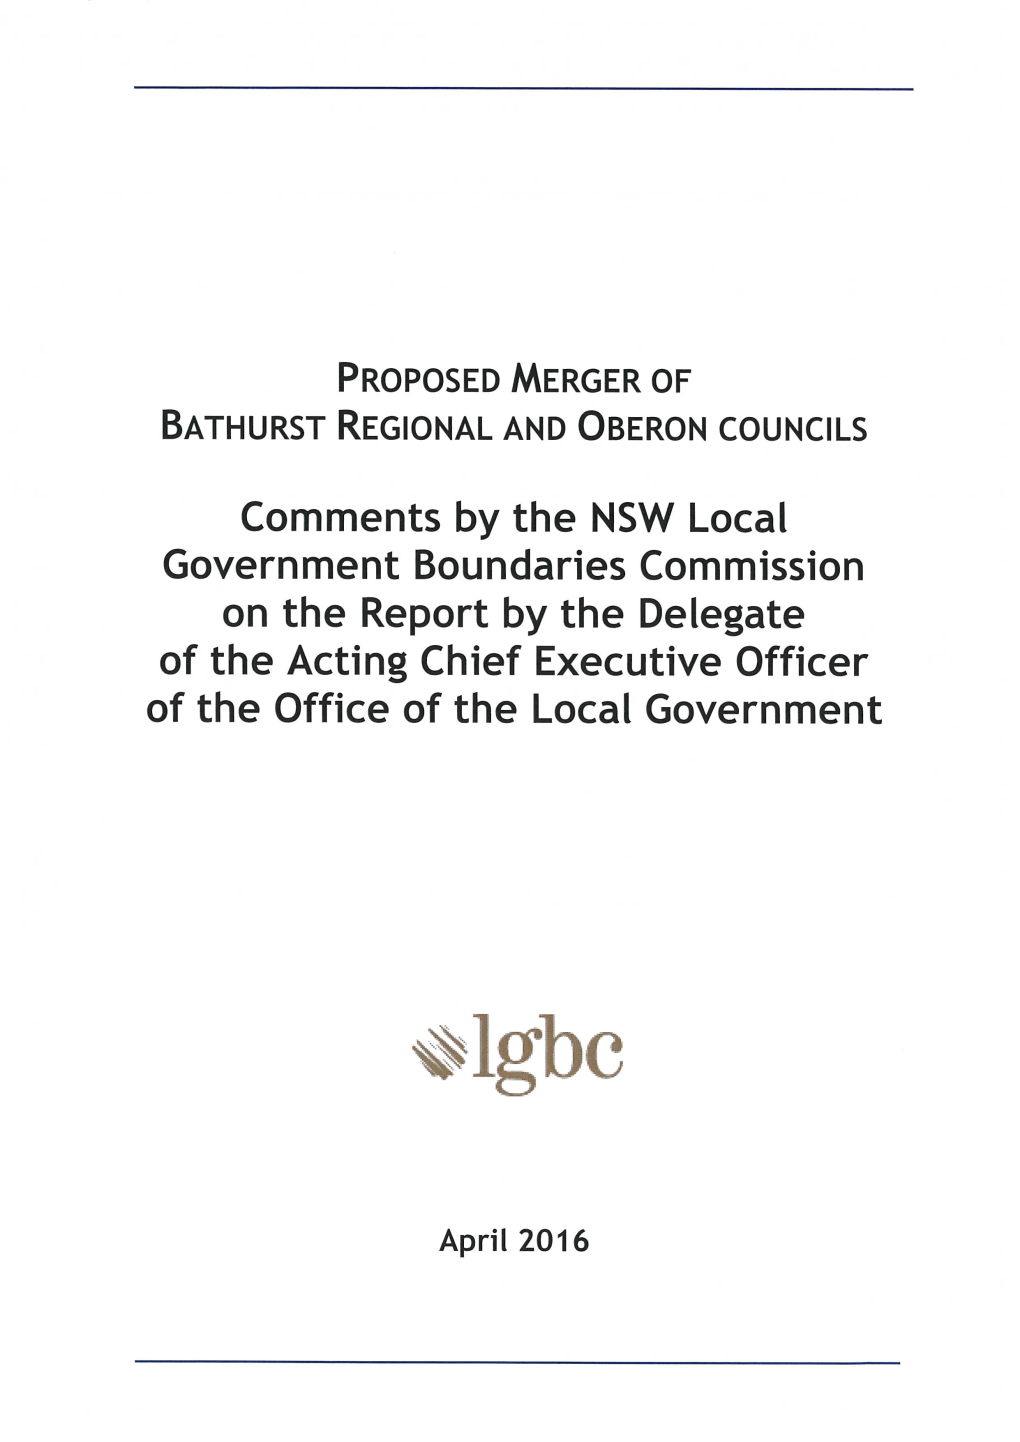 Bathurst and Oberon 1 Local Government Boundaries Commission